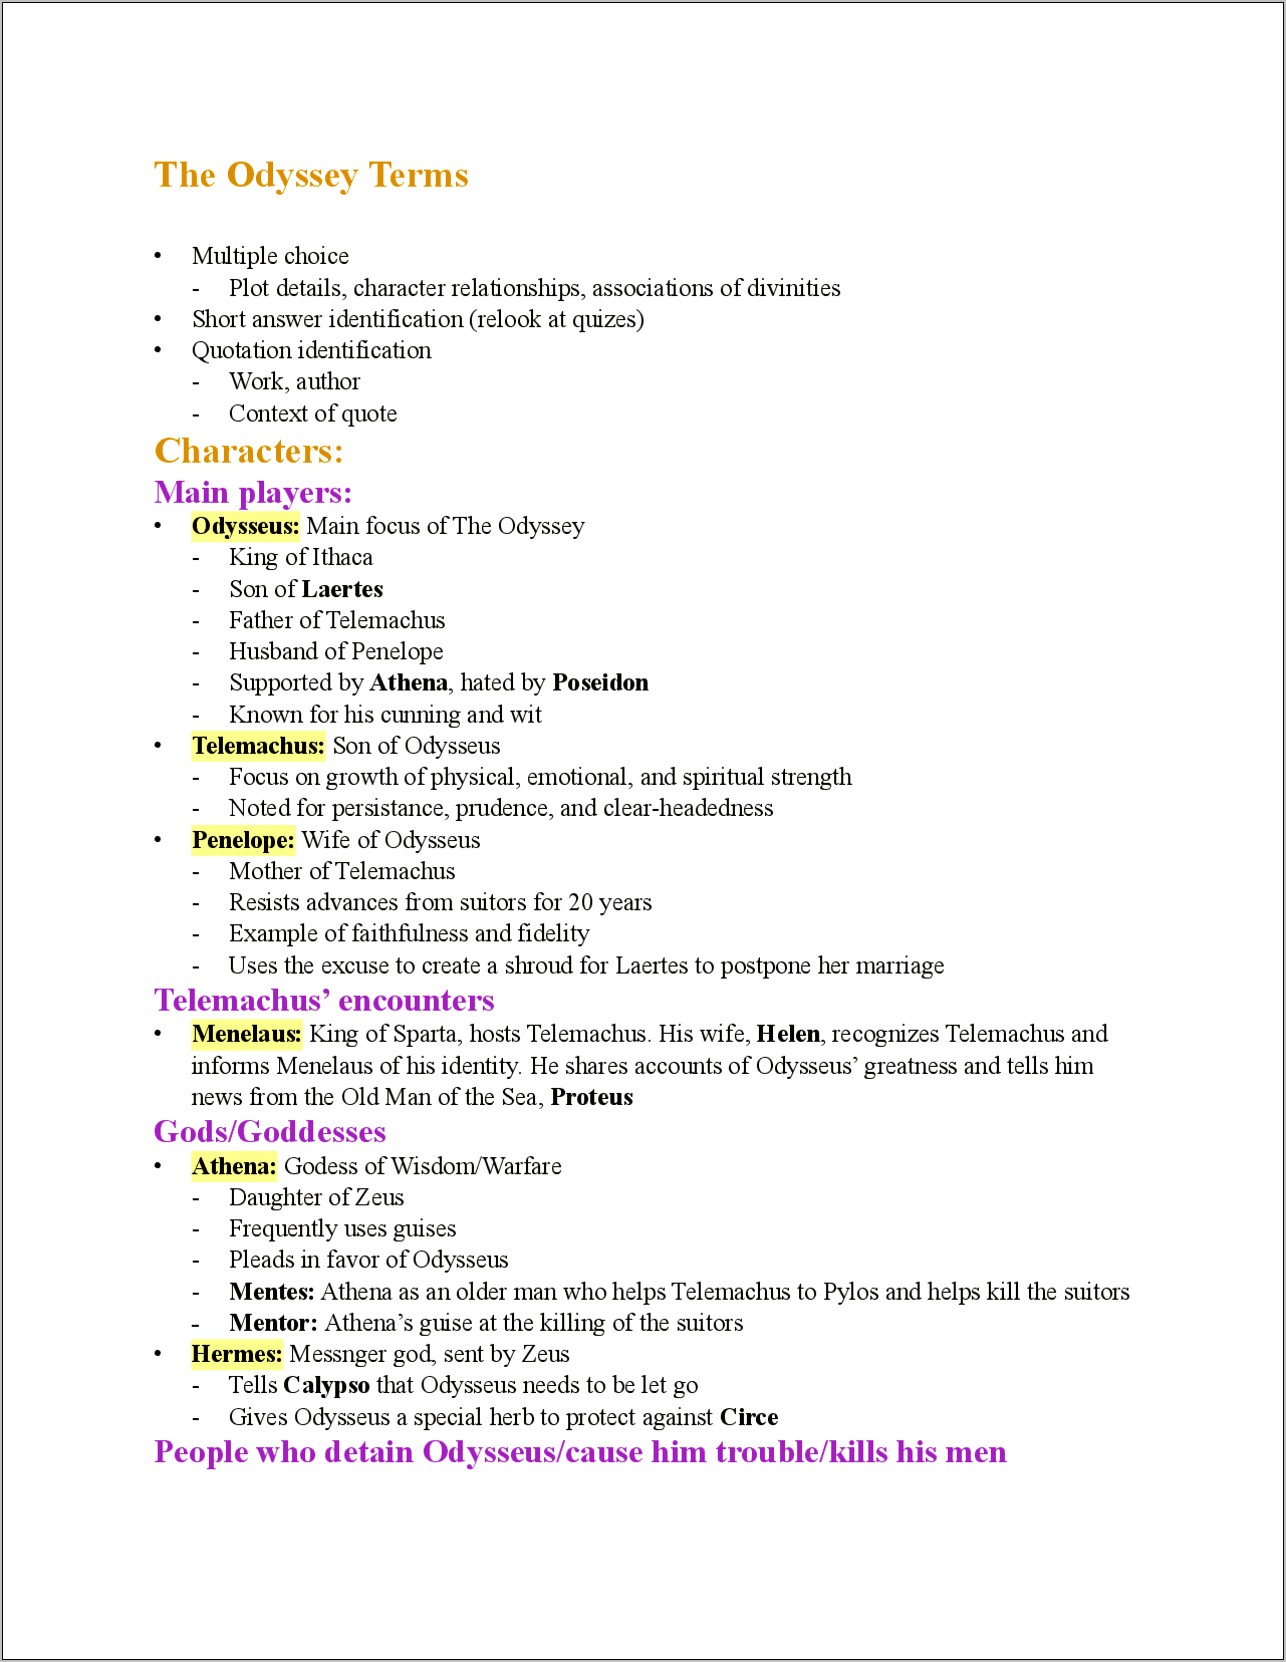 Uga Resume Examples For Students